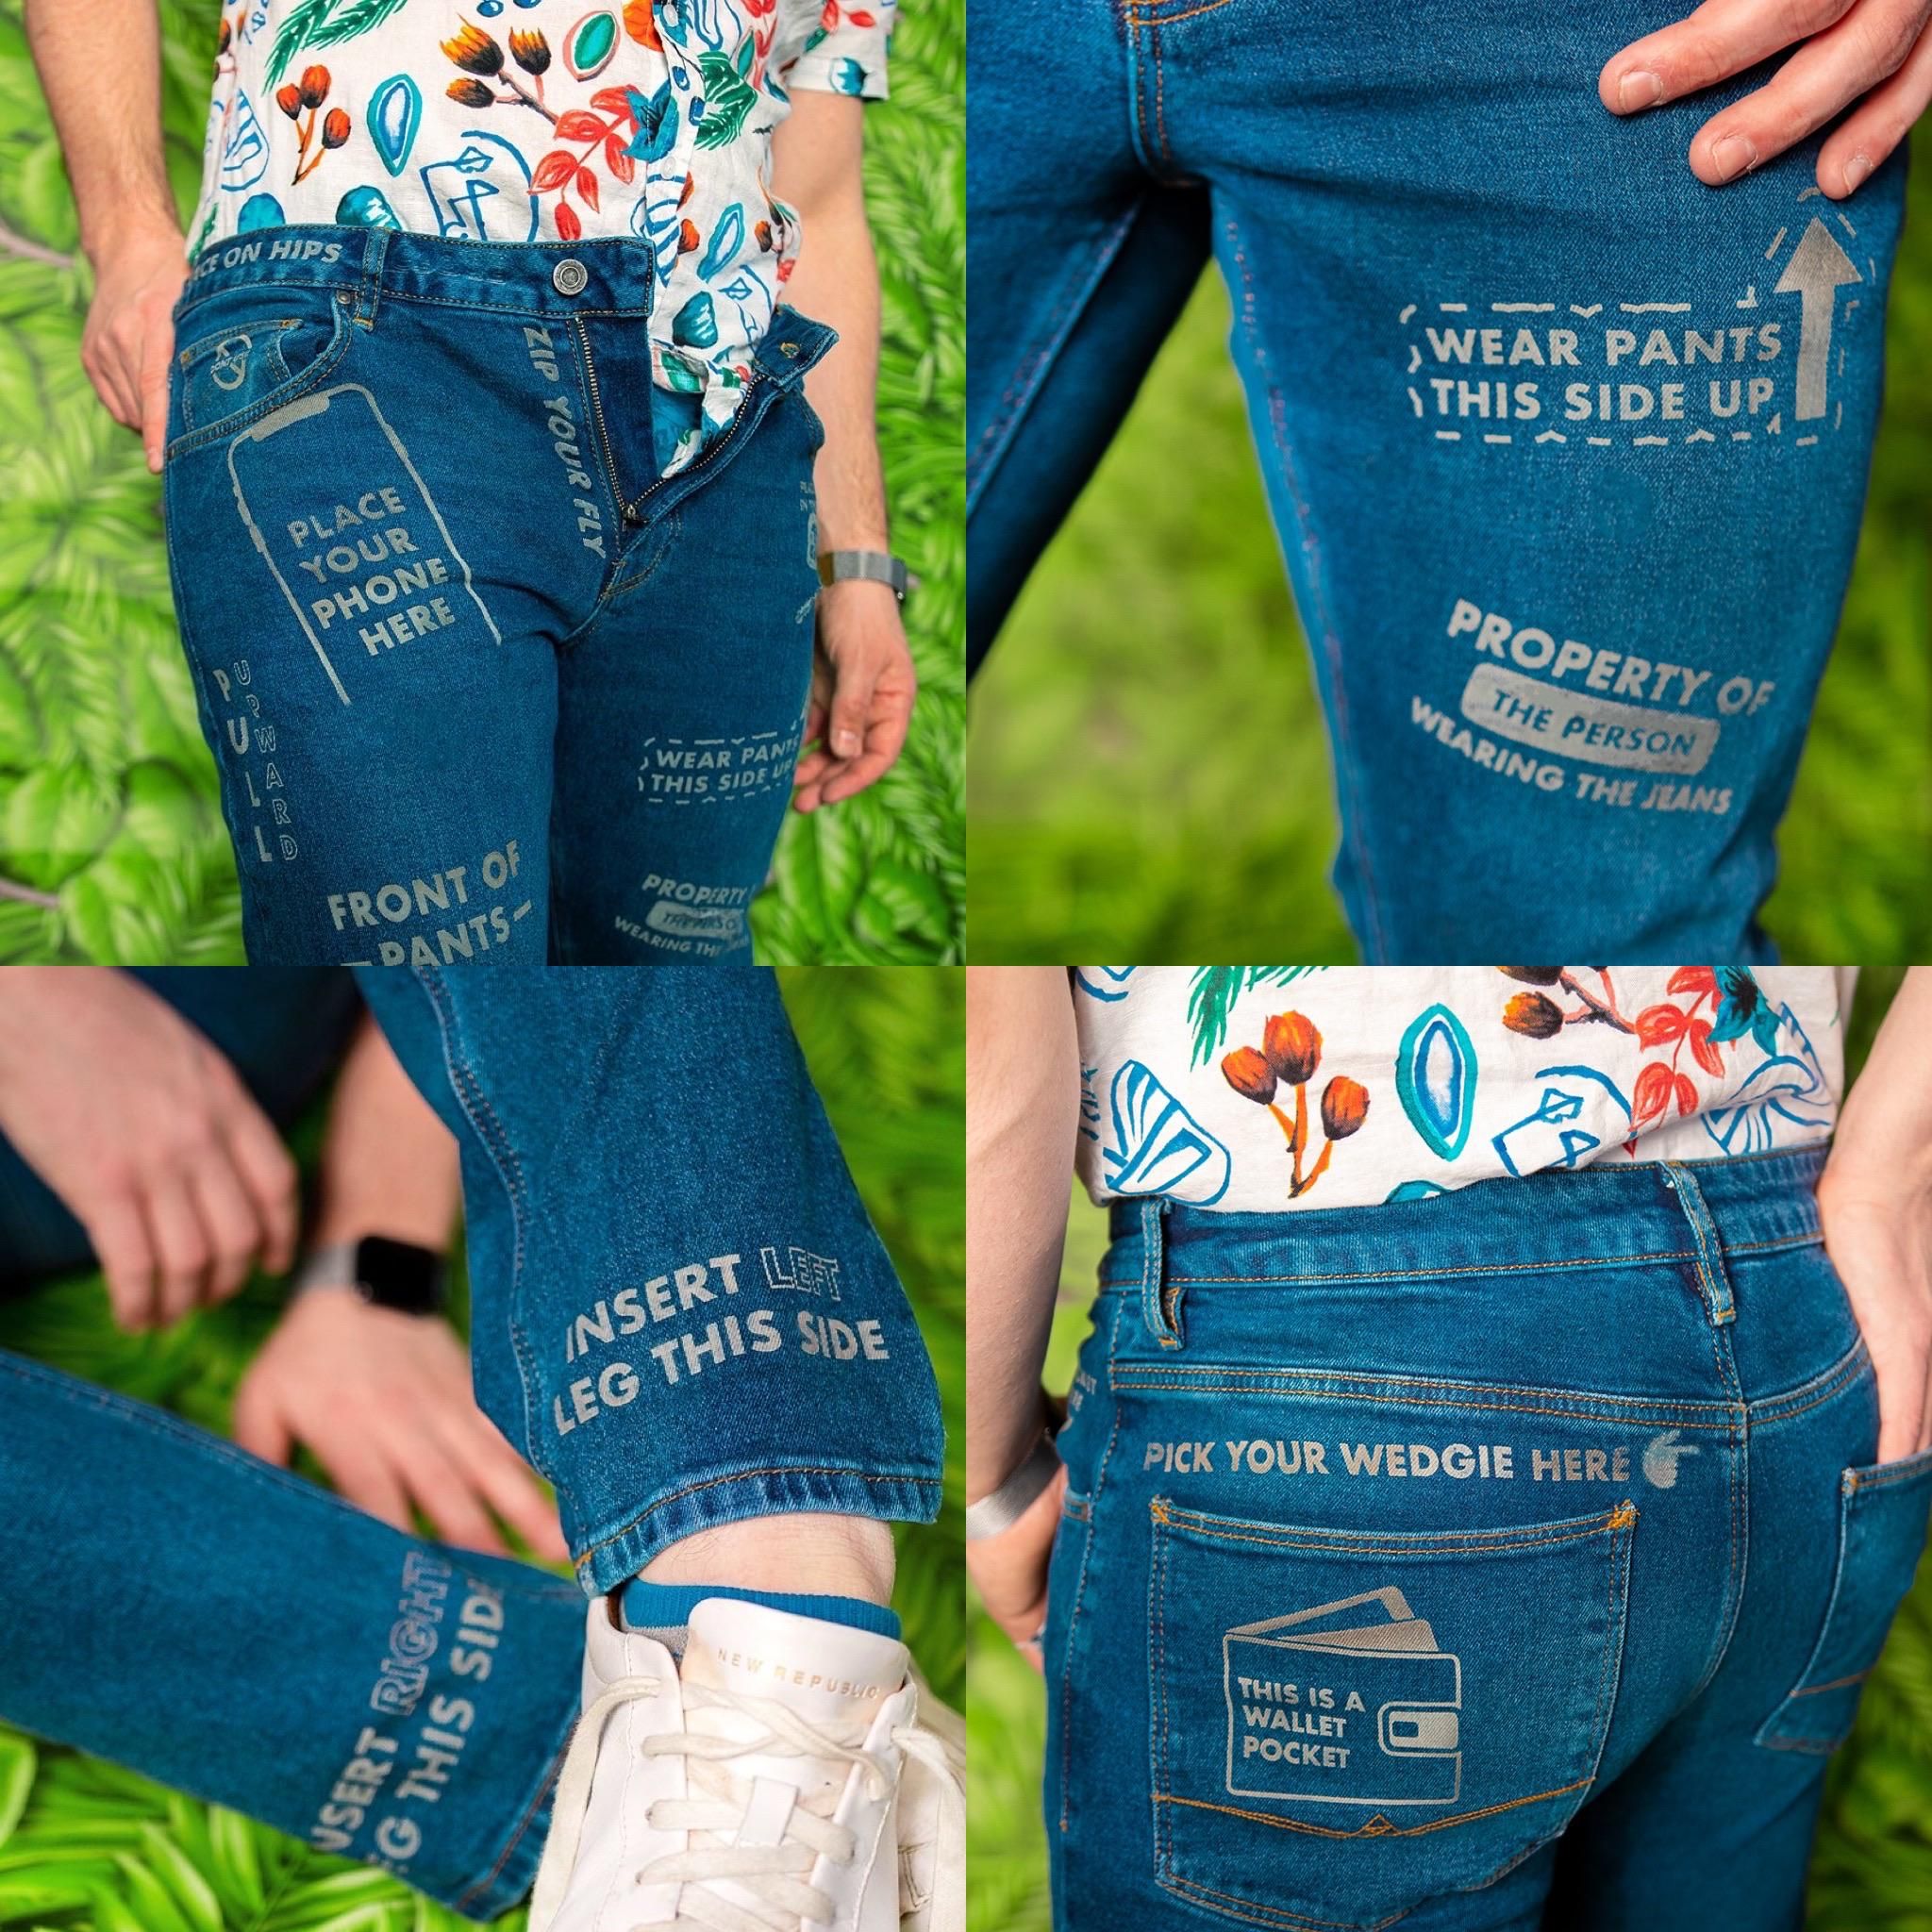 I design unnecessary products, so I made the Instructional Pants so you know exactly how you are supposed to put them on.